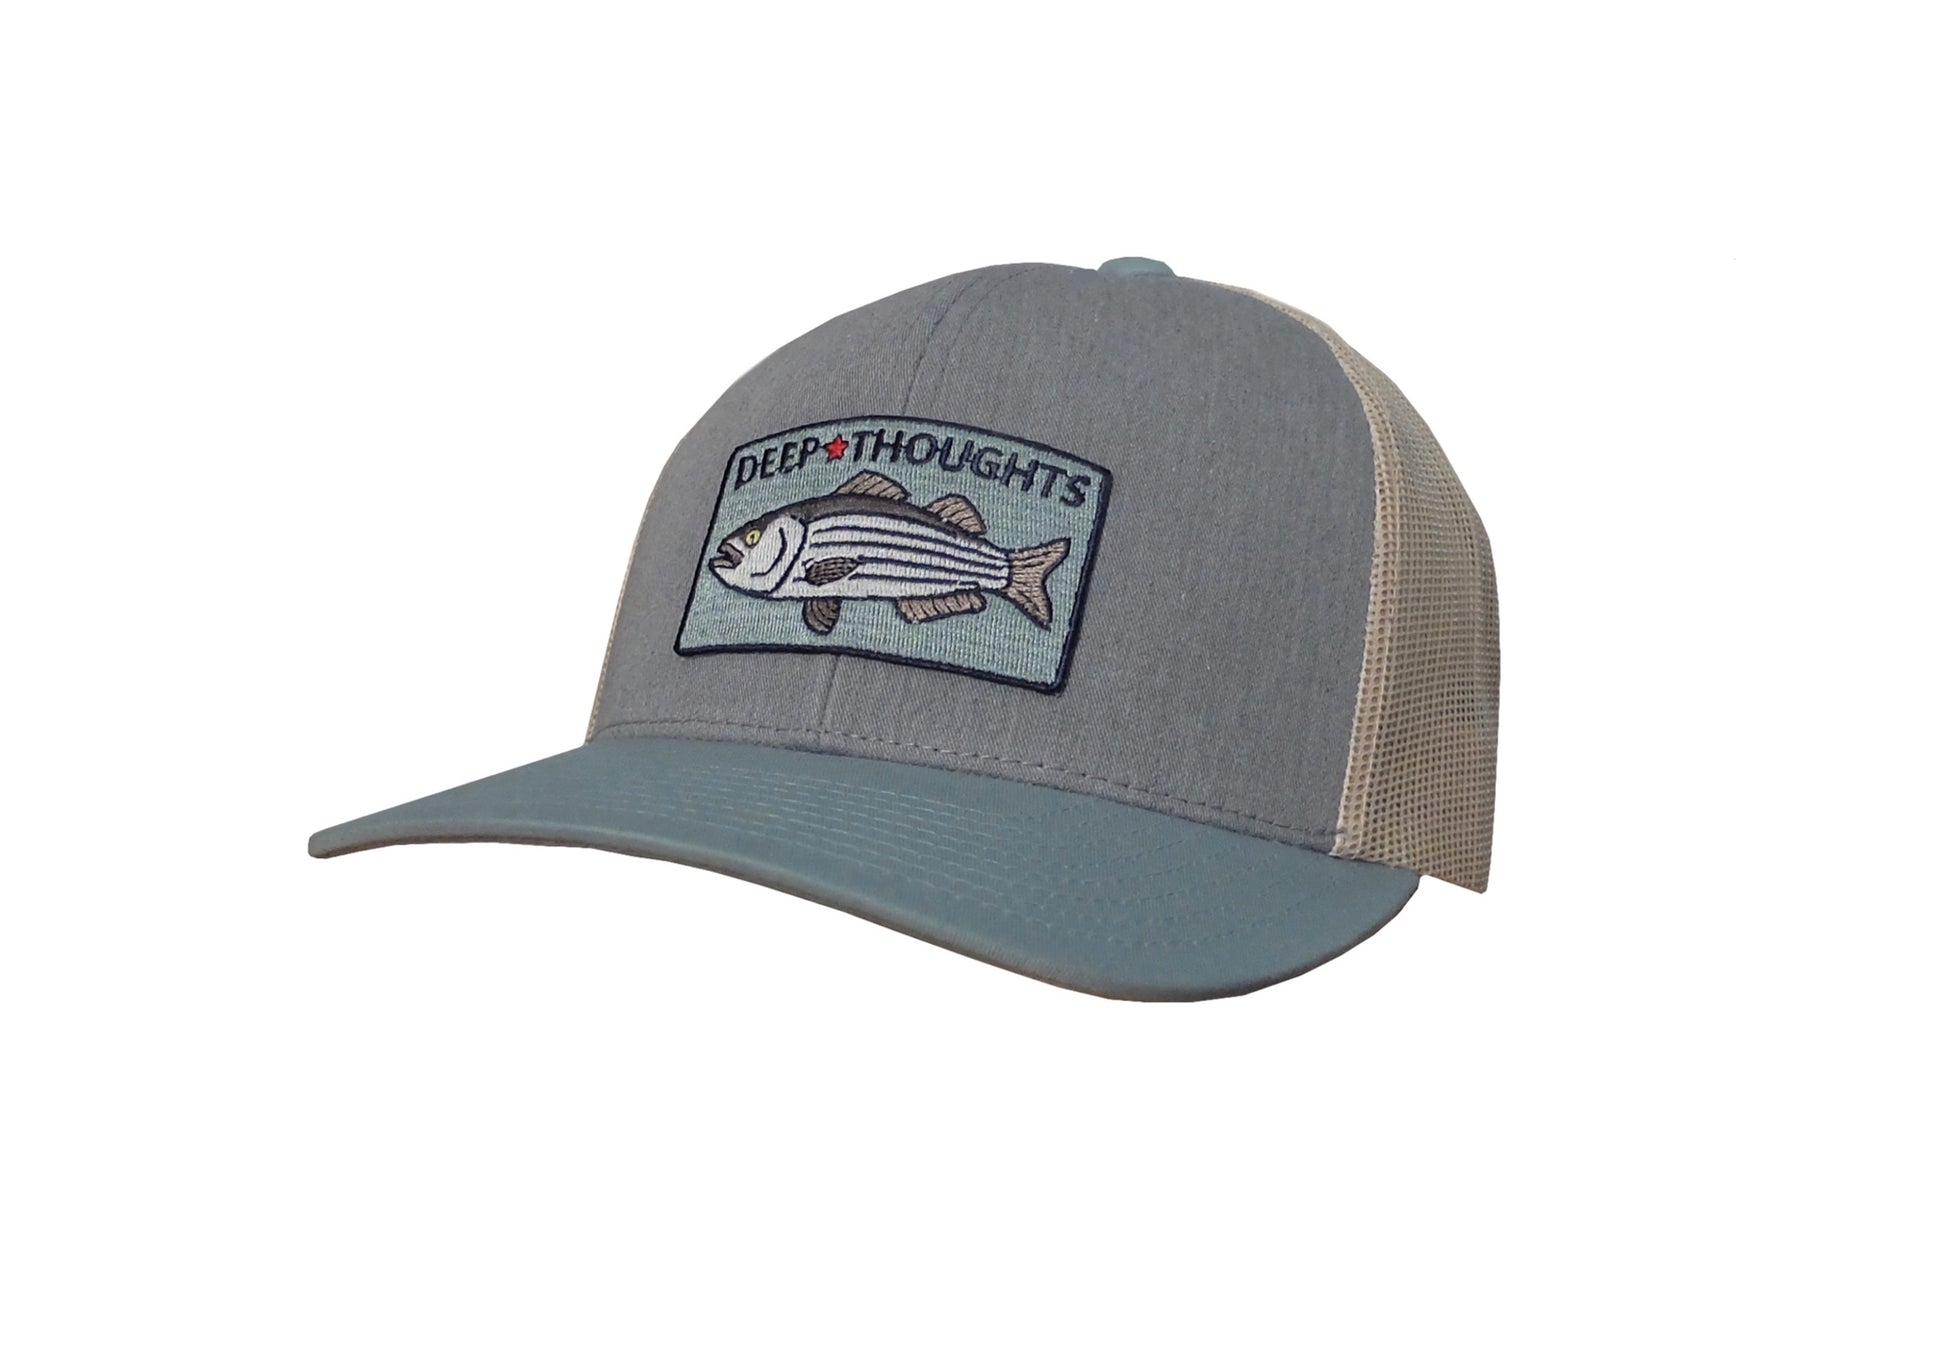 grey and smoke blue trucker hat with embroidered striped bass patch and Deep Thoughts text